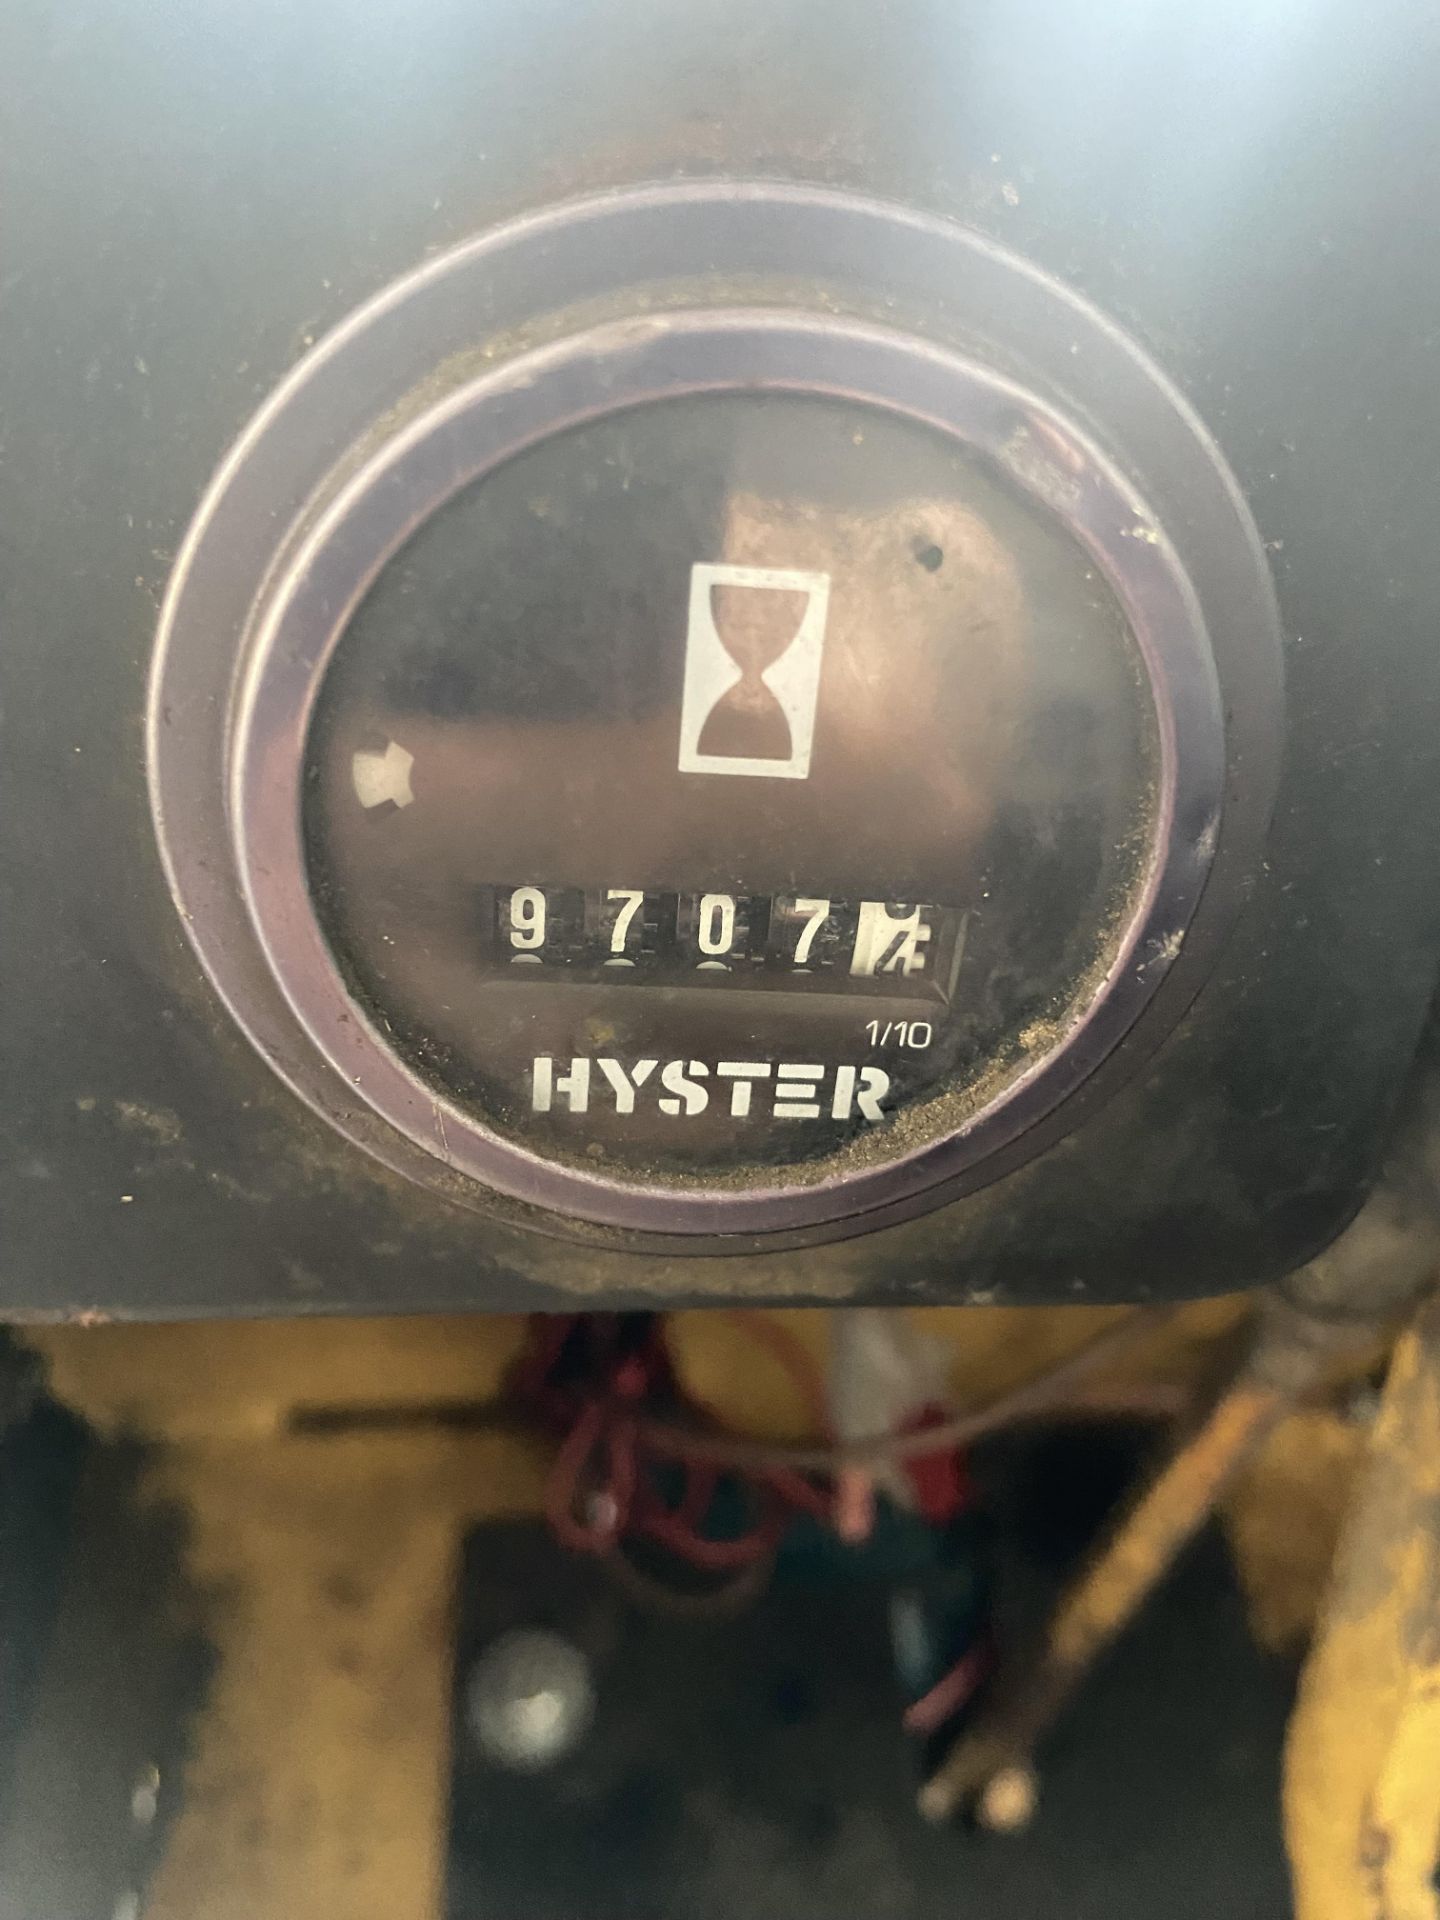 Hyster H1.50XL 1525kg cap. LPG Fork Lift Truck, serial no. C001B11623M, year of manufacture 1991, - Image 6 of 9